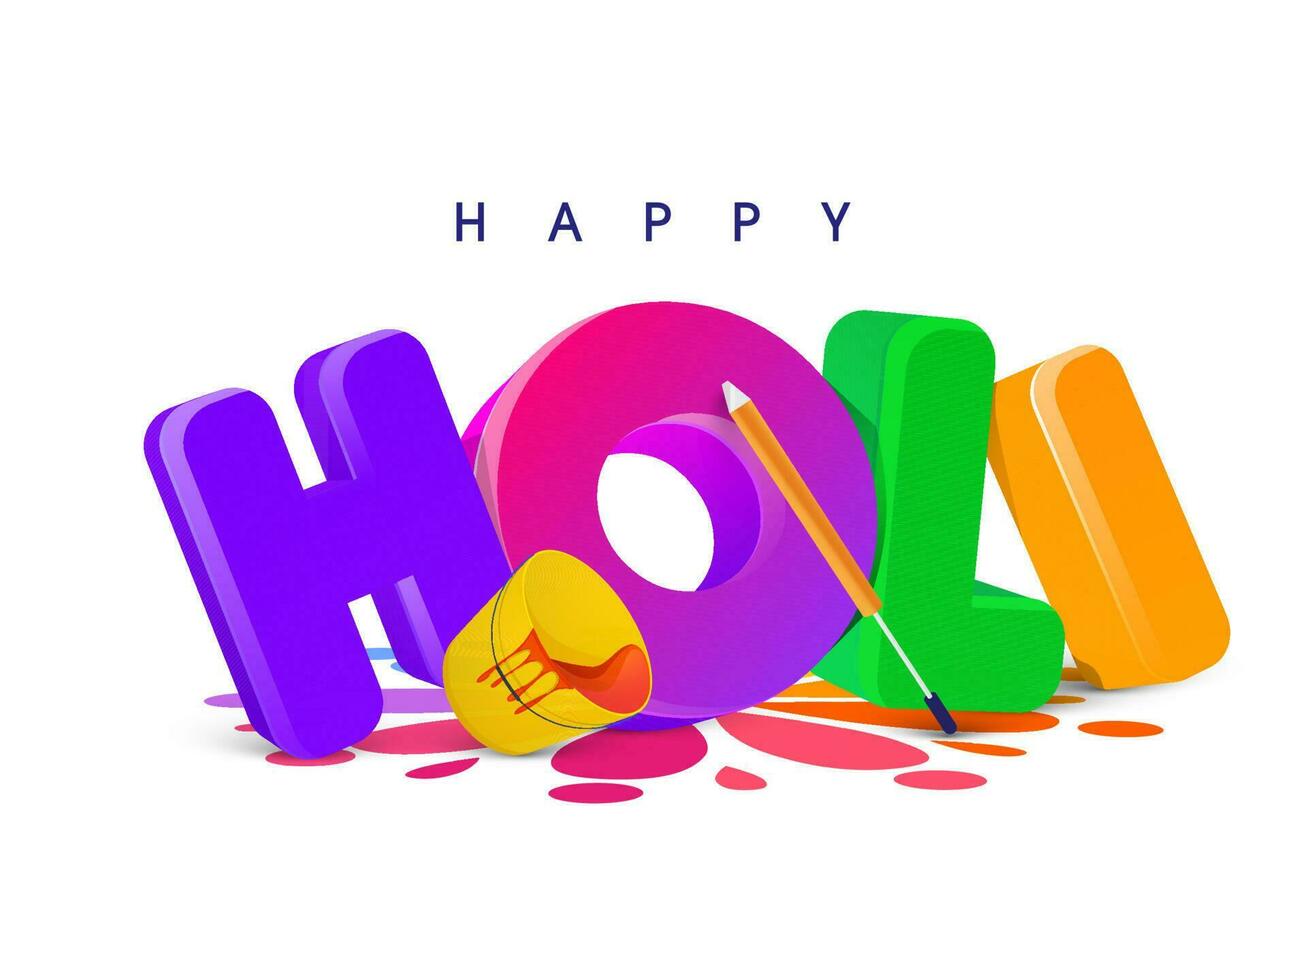 Indian Festival of Colours, Happy Holi Concept. vector